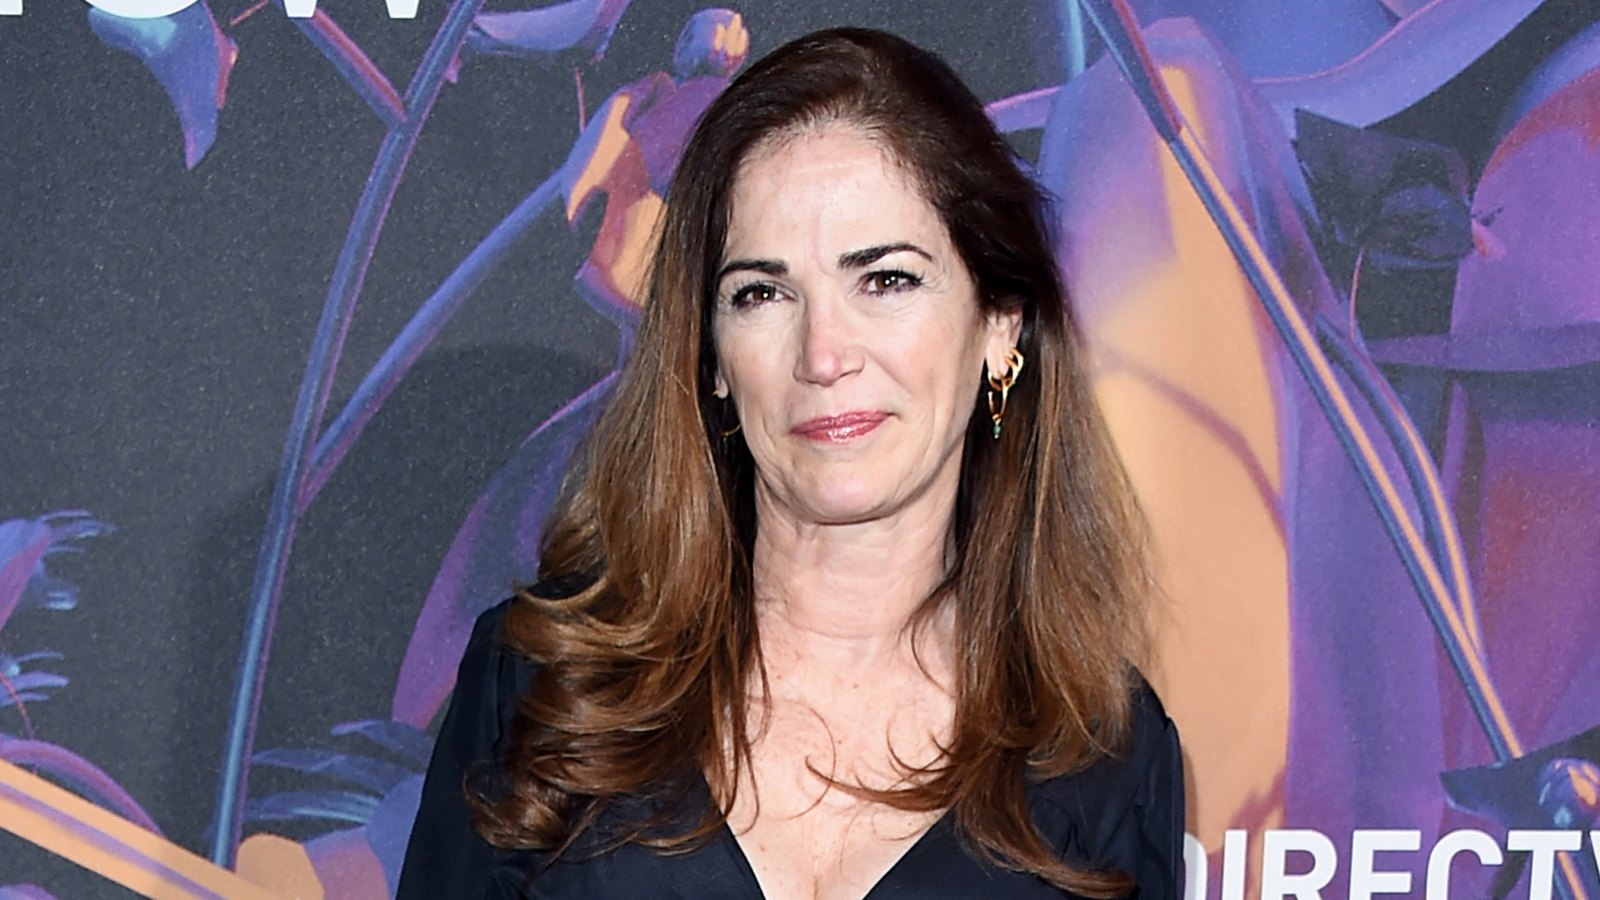 'NYPD Blue' Star Kim Delaney Sued for Allegedly Fleeing Scene of 2022 Hit and Run Accident